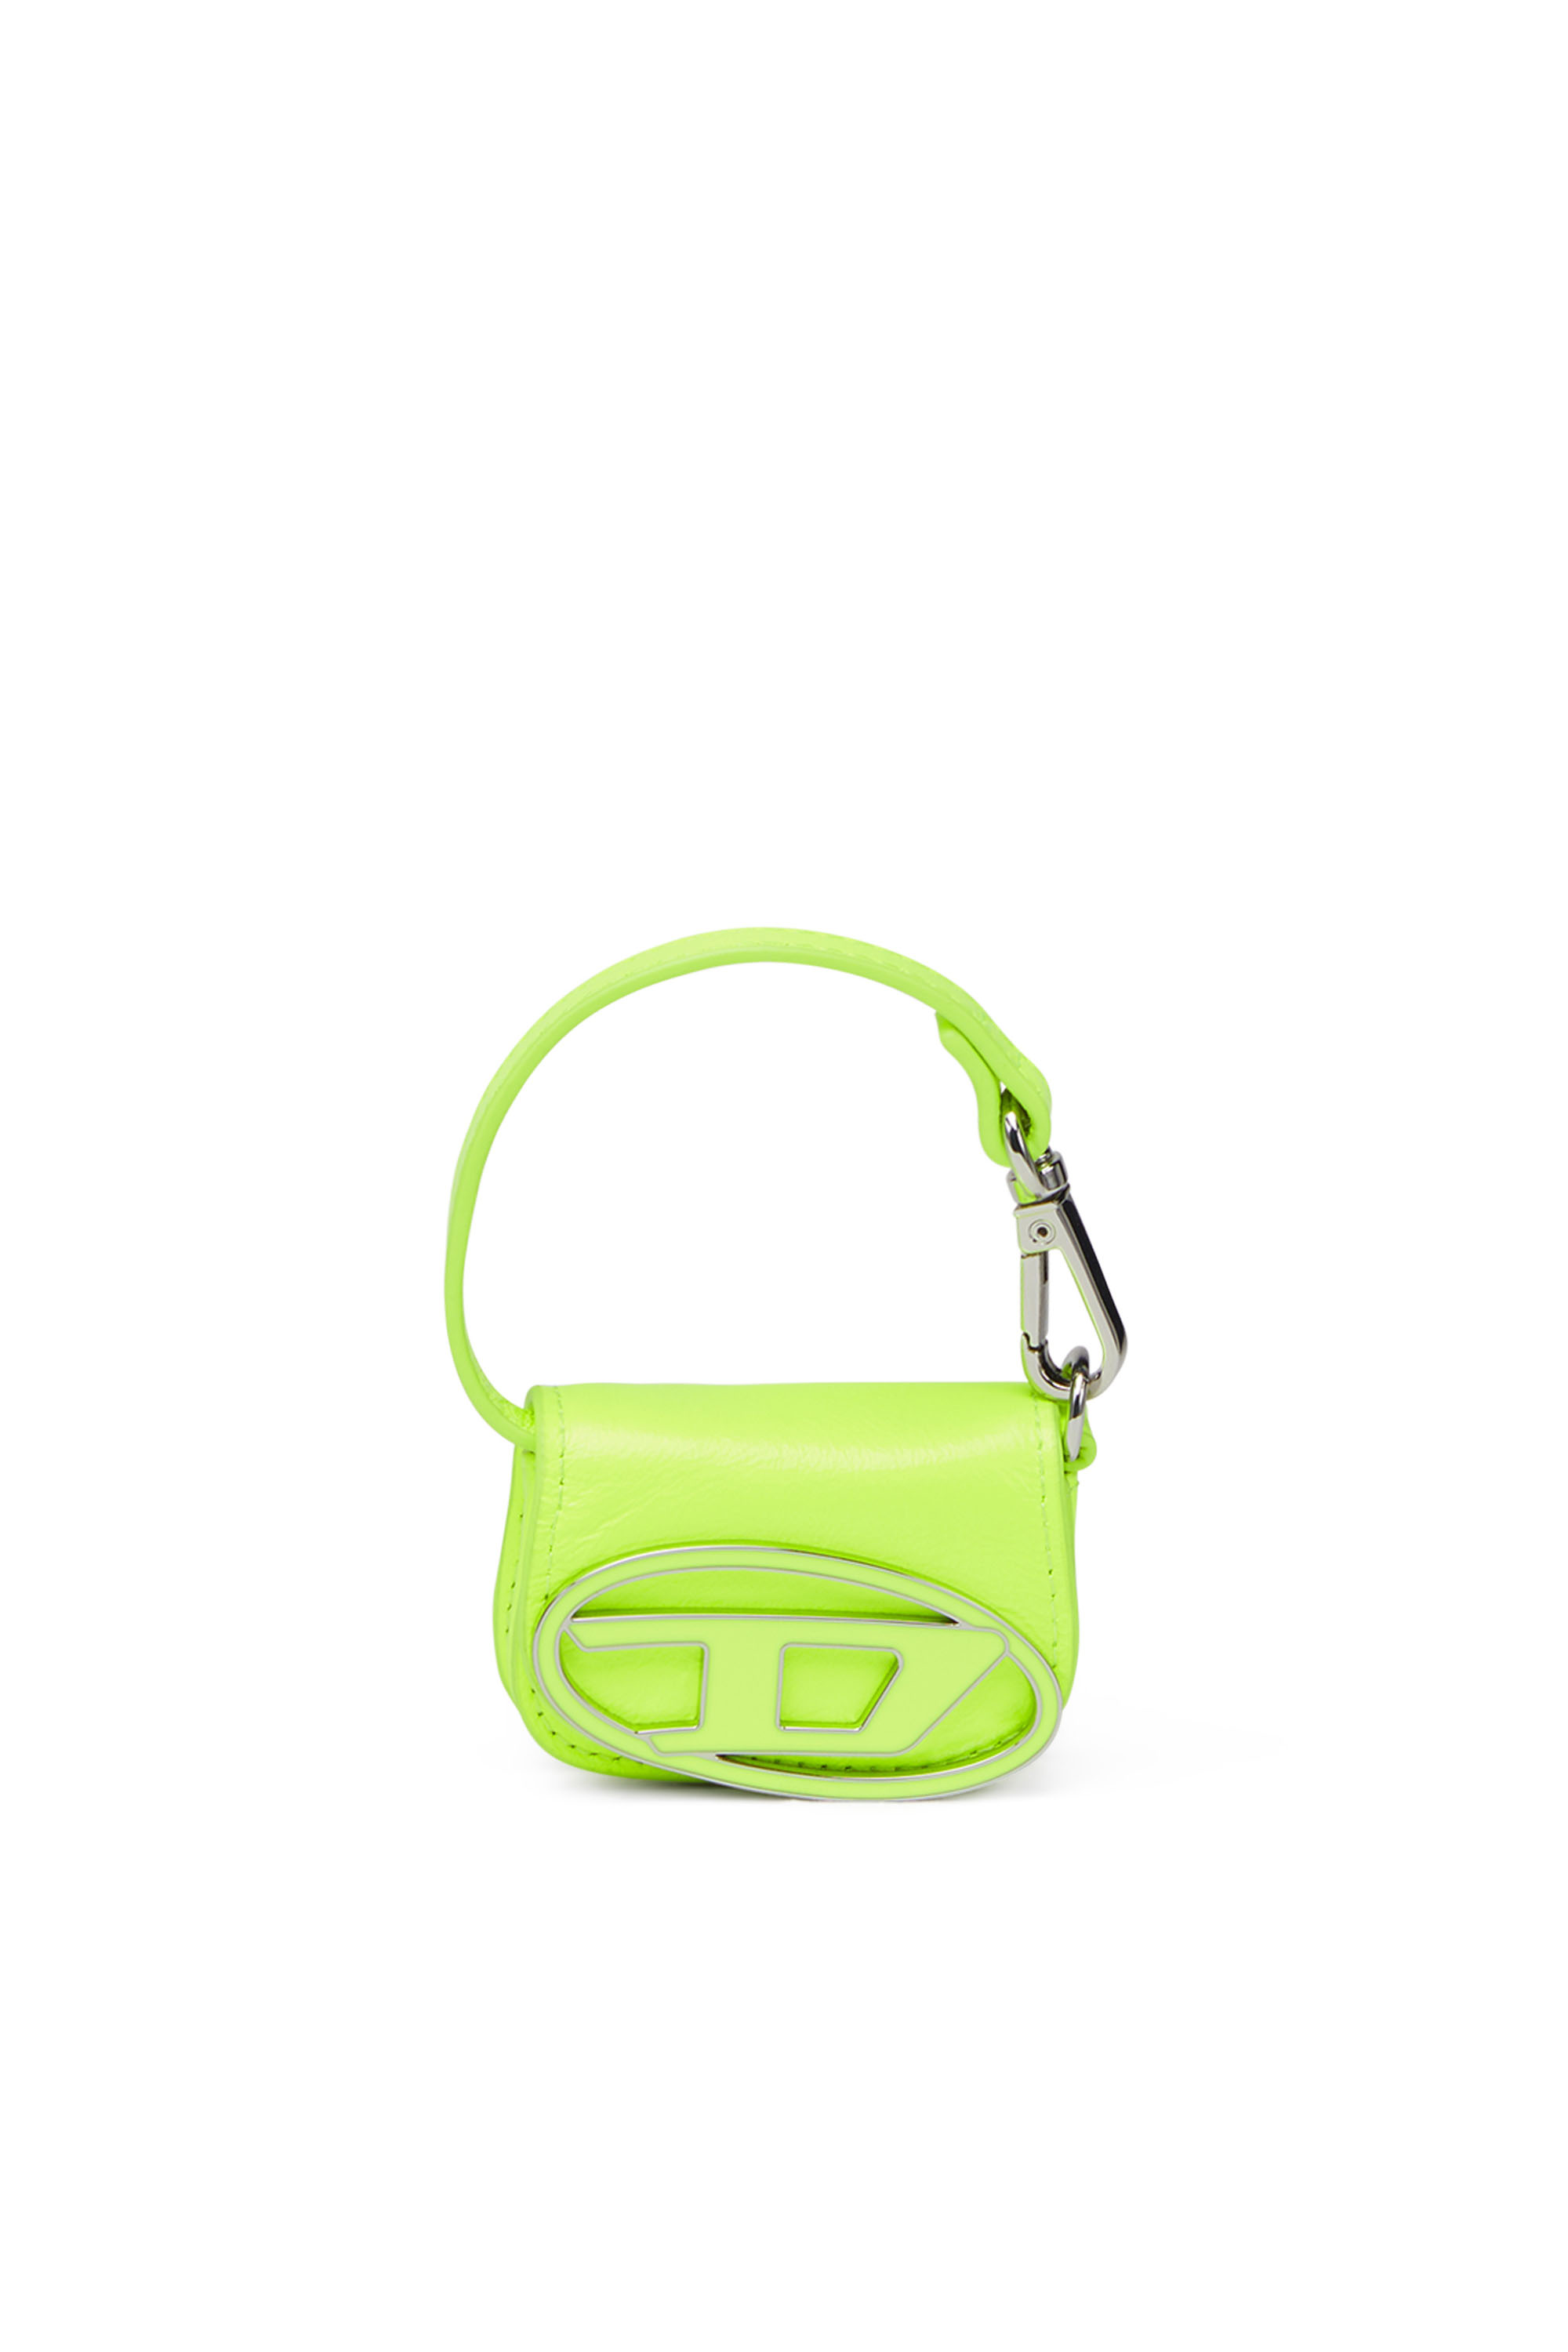 1DR MICRO Woman: Bag charm in neon leather